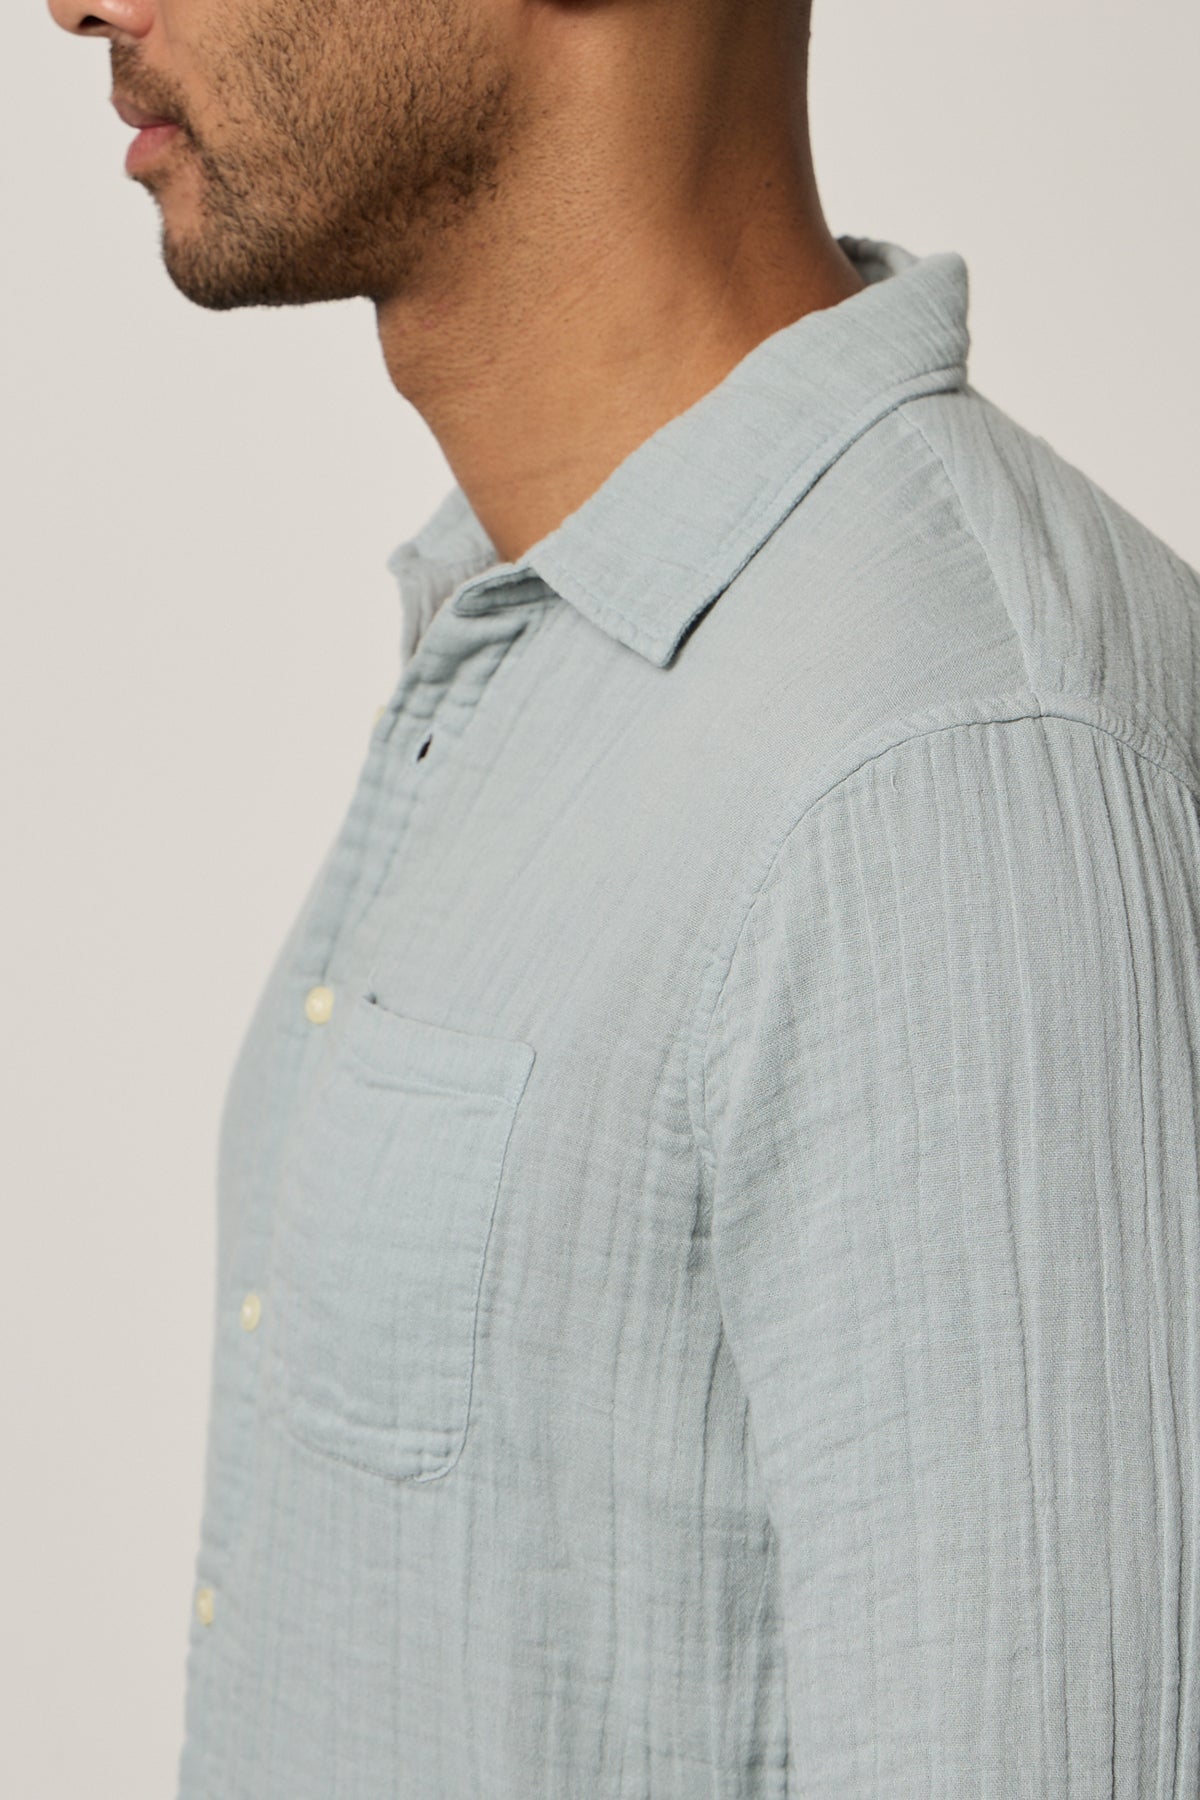   Elton Button-Up Shirt in ice blue detail 